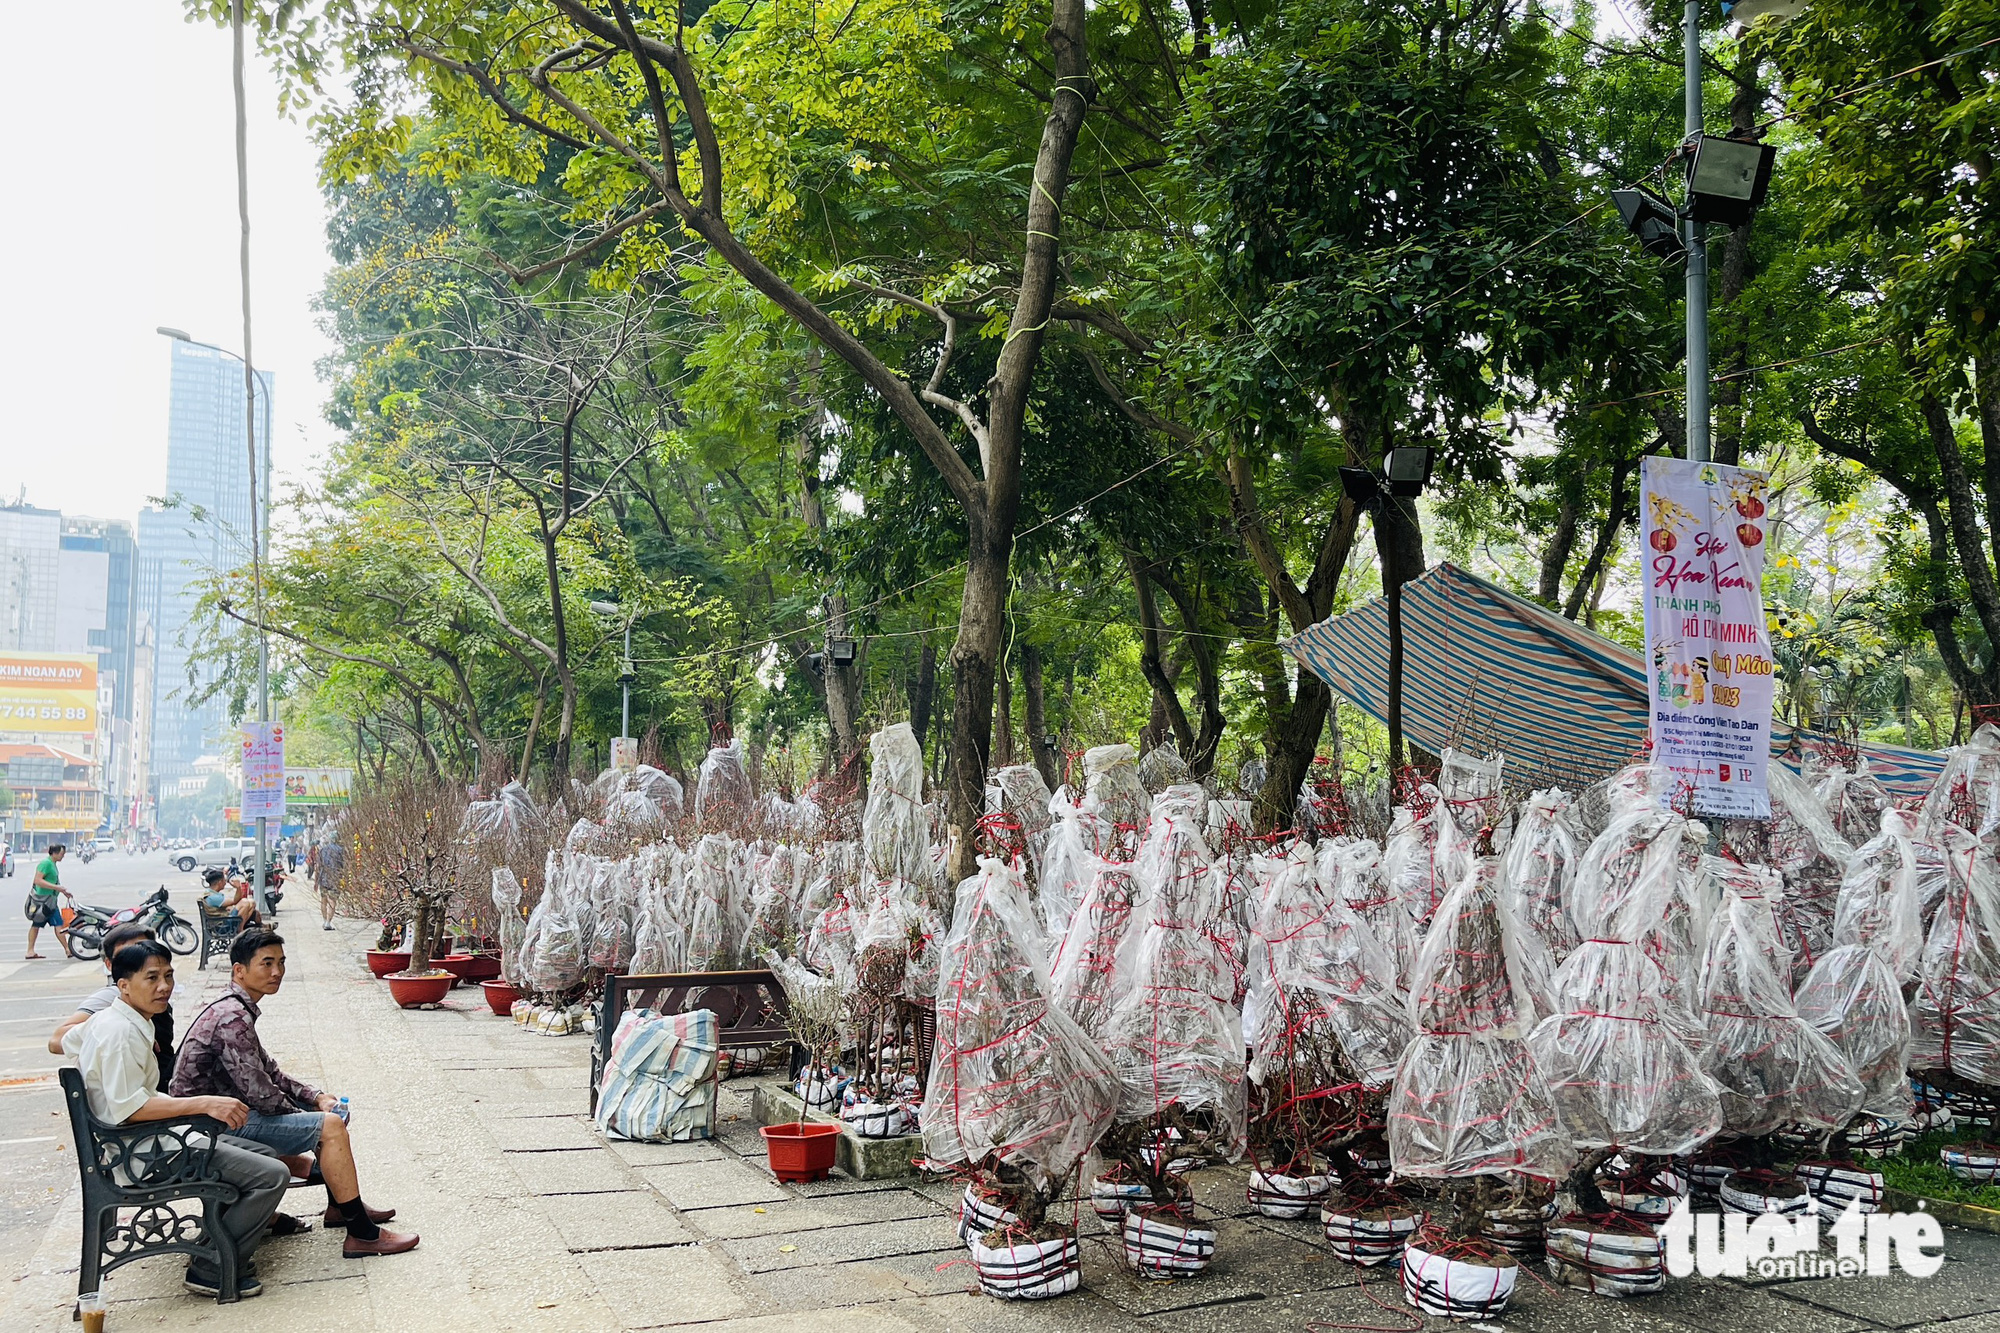 Peach blossom trees are sold at a flower market at 23/9 Park, District 1, Ho Chi Minh City. Photo: Le Phan / Tuoi Tre